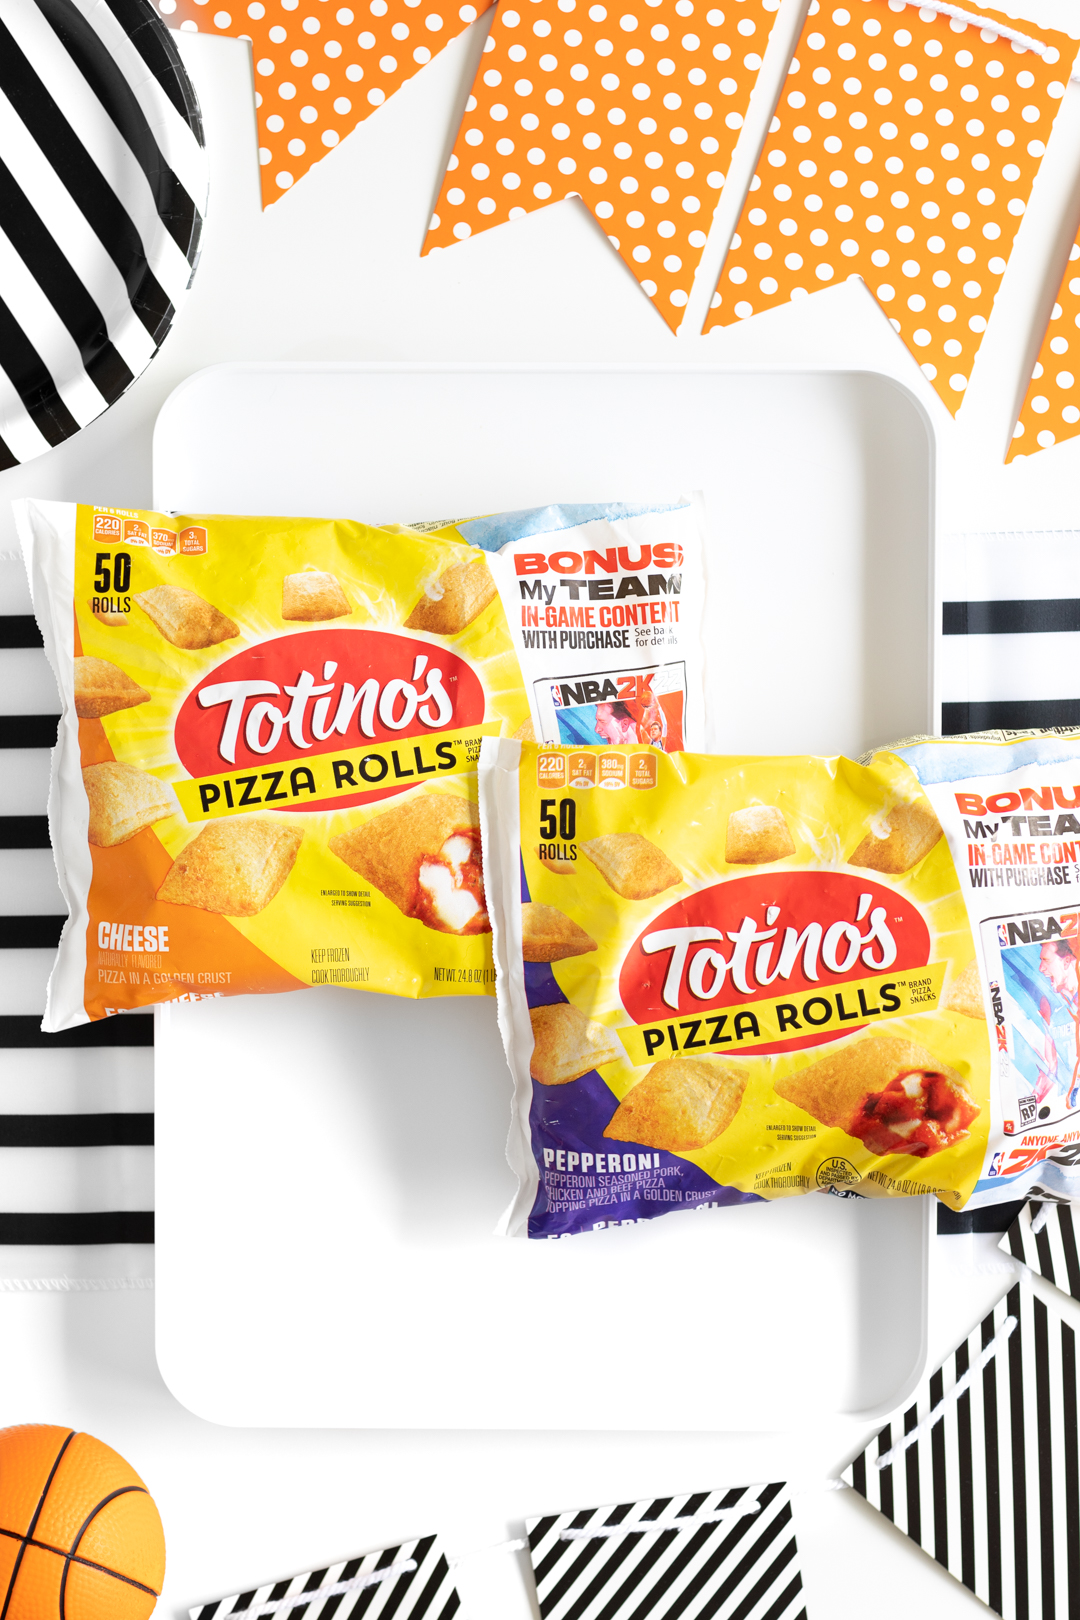 totinos pizza rolls packaging on a basketball themed party table